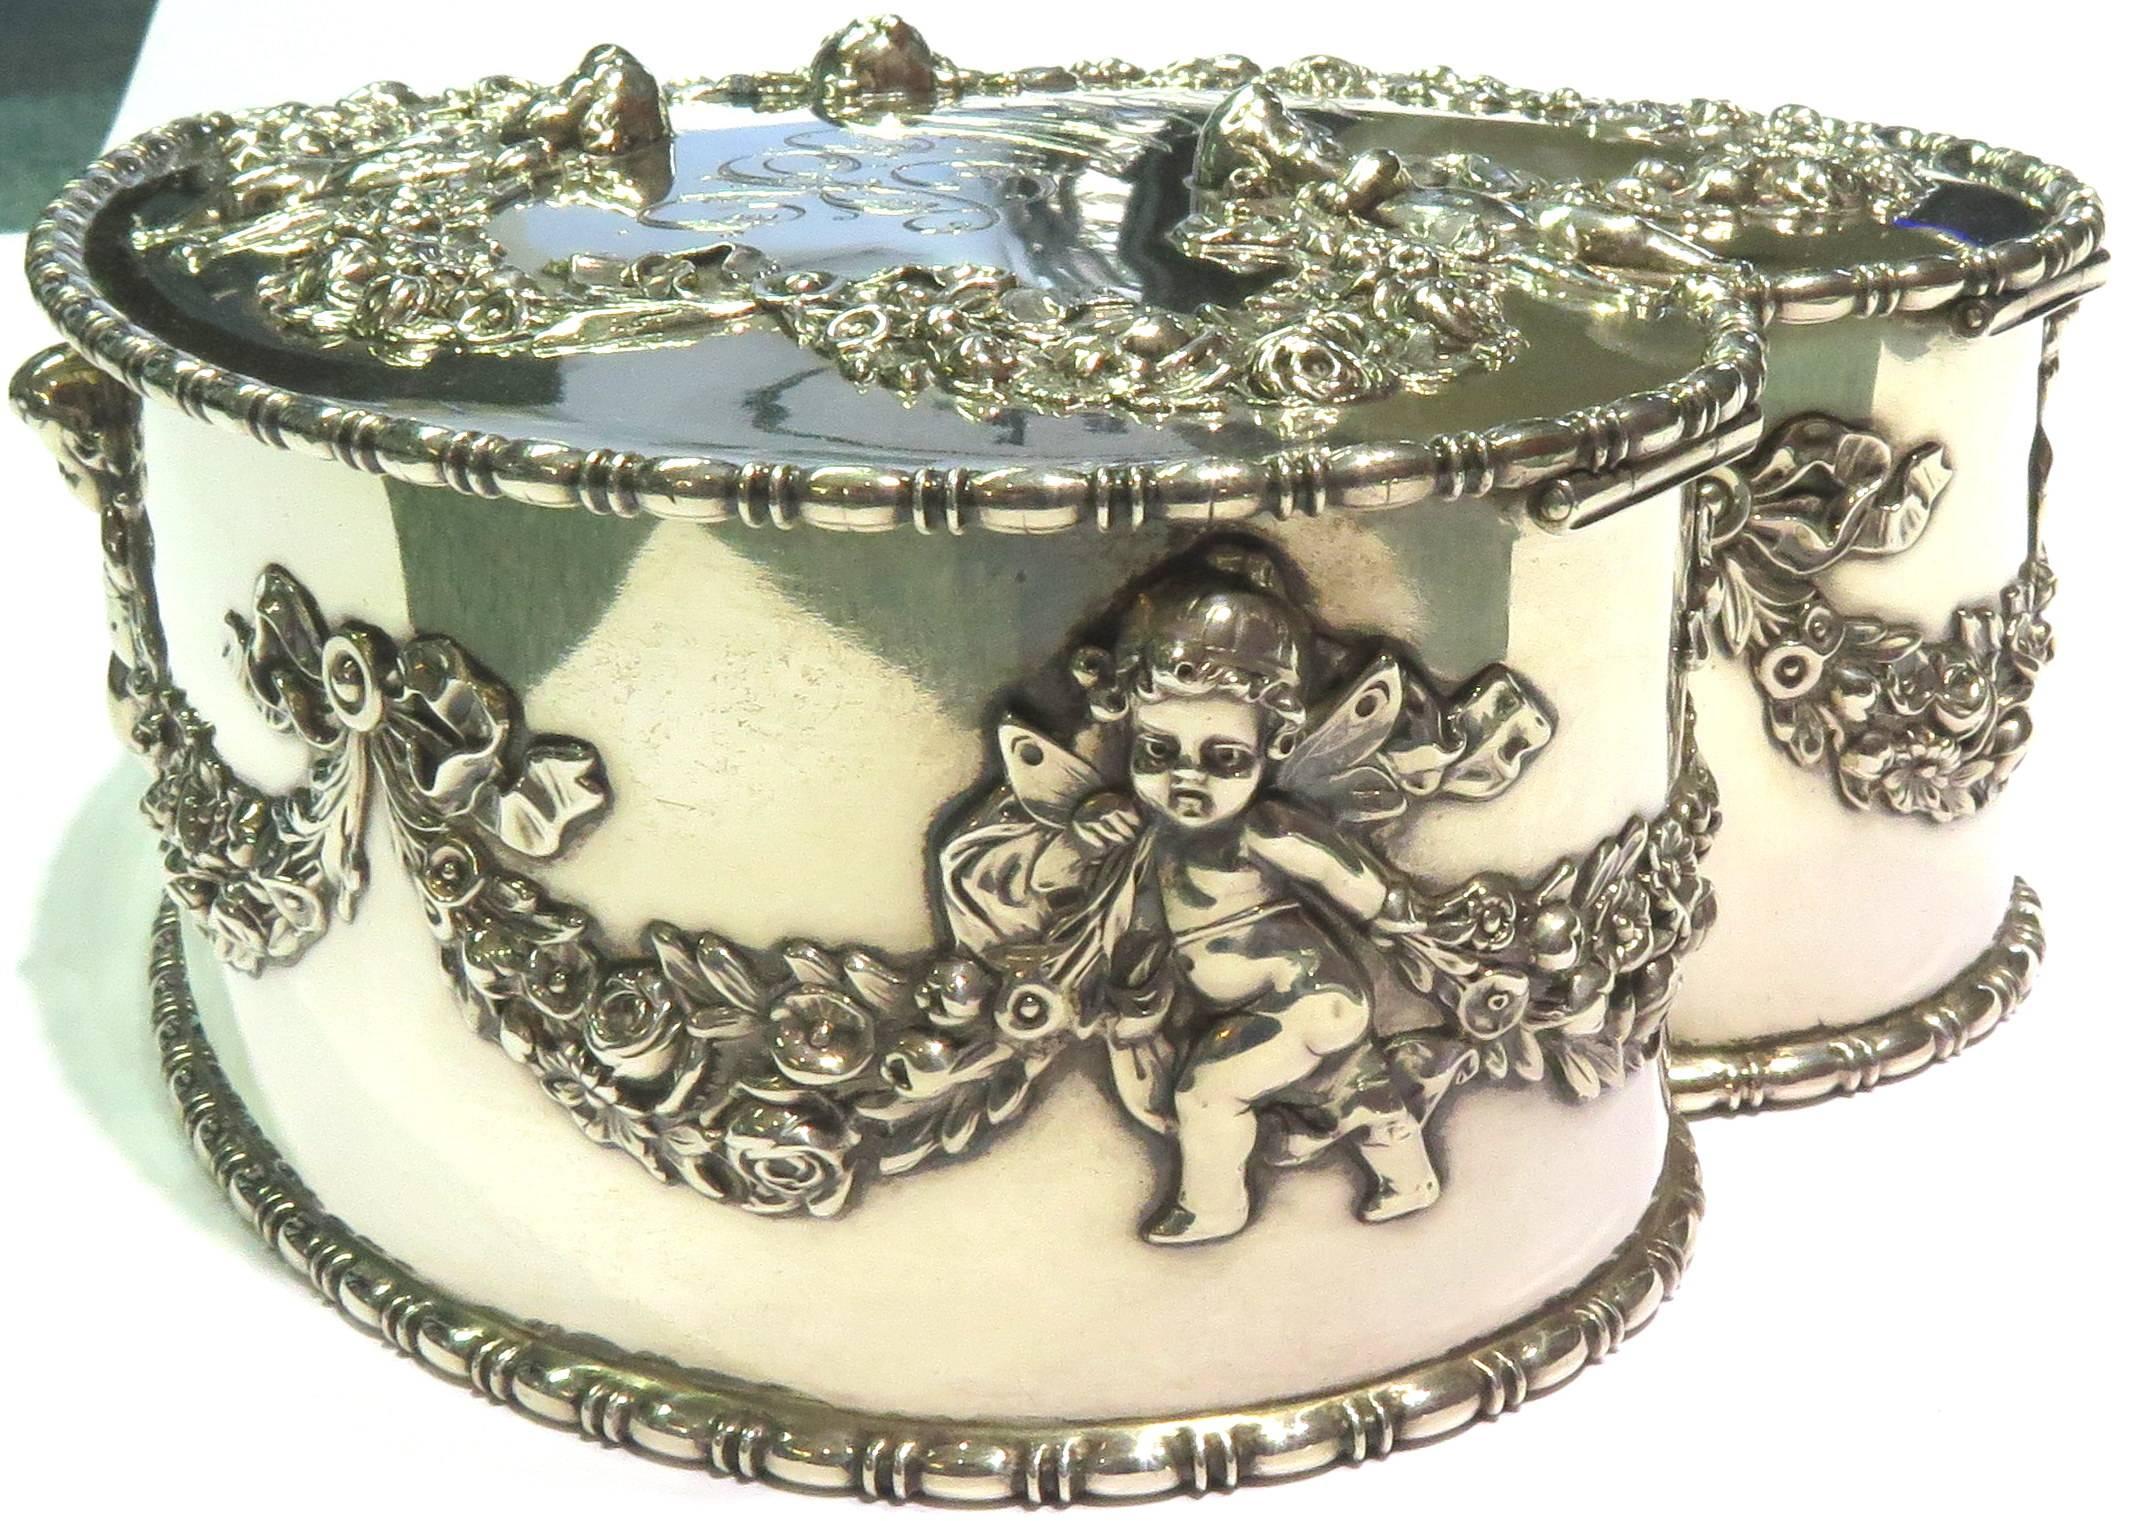 This incredible ornate jewelry box is made by Howard & Co. around the turn of the century. It is in excellent condition with garland being draped by the cherubs.The inside is also in wonderful condition featuring 5 ring slots and a lot of room to